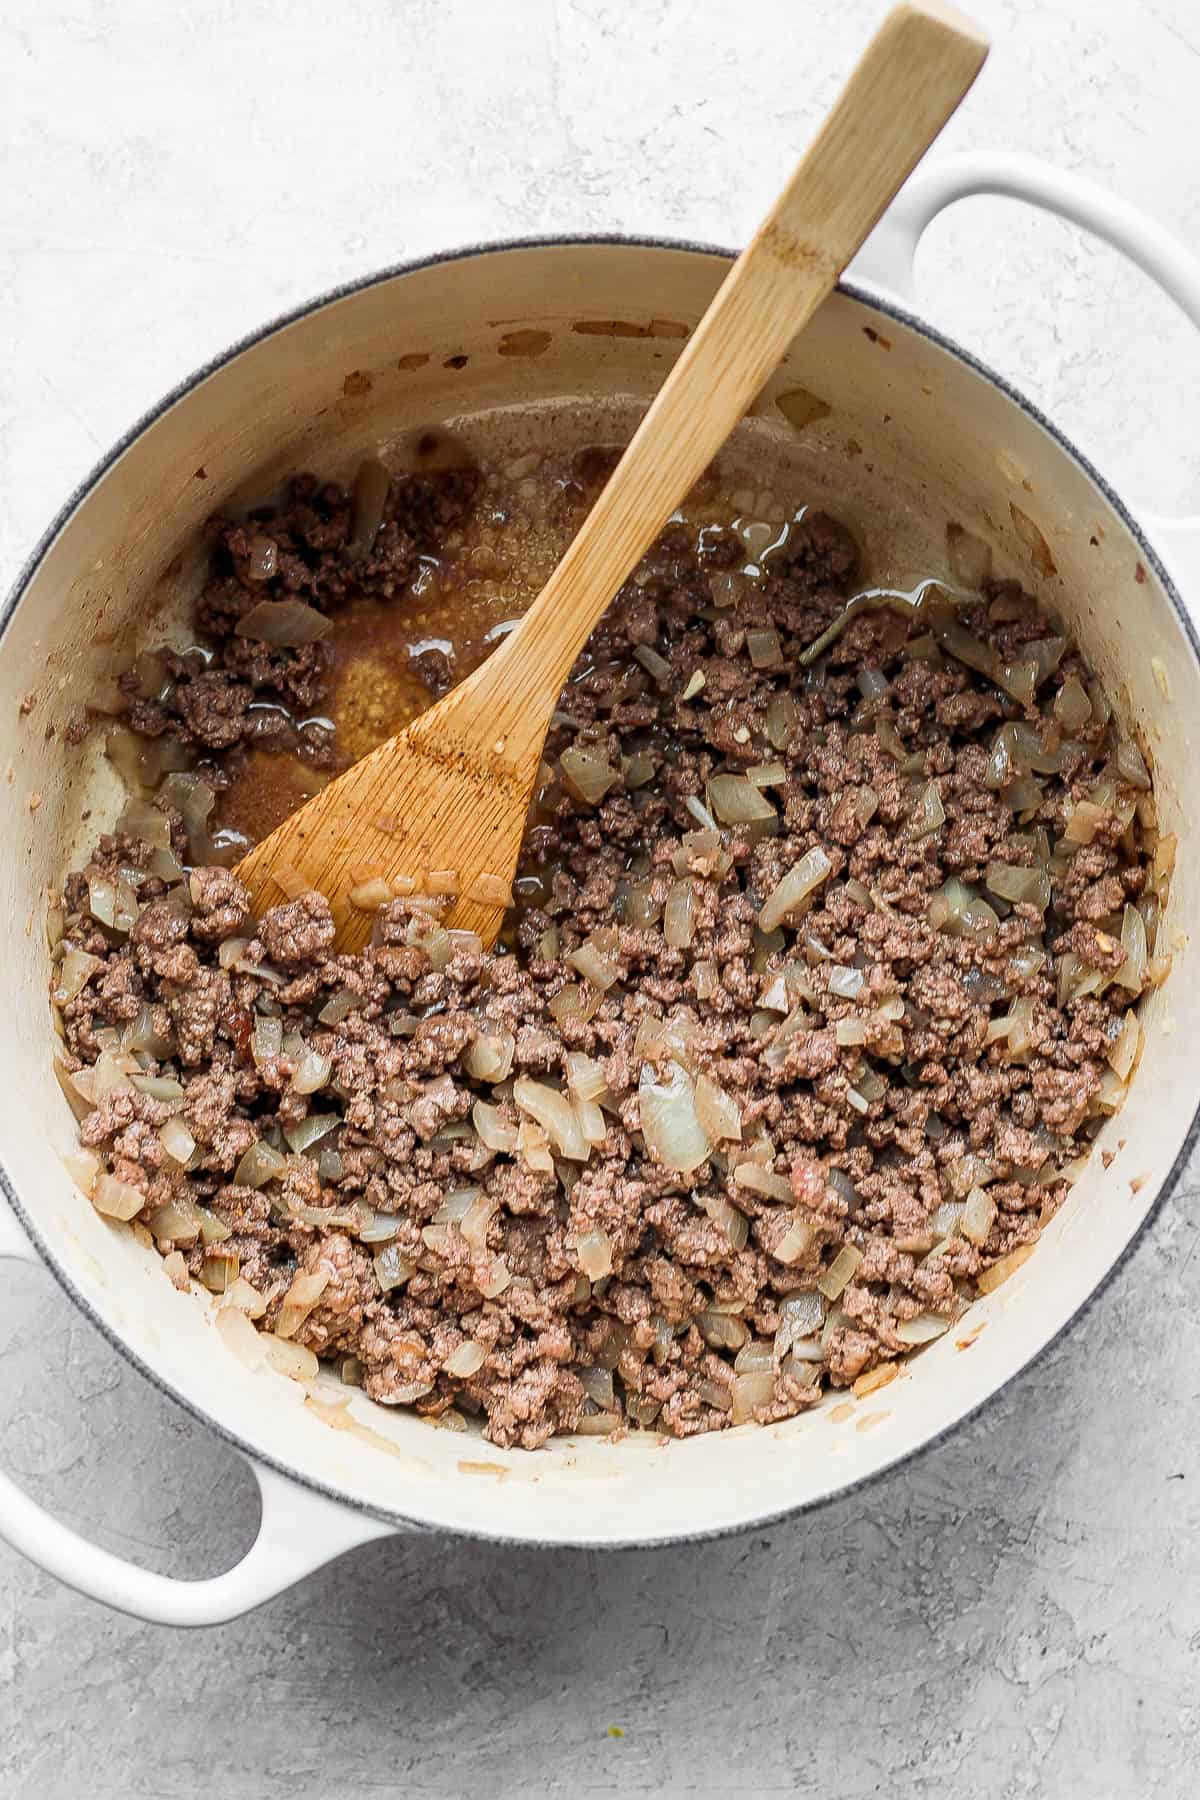 Ground beef added to the onion and garlic mixture.